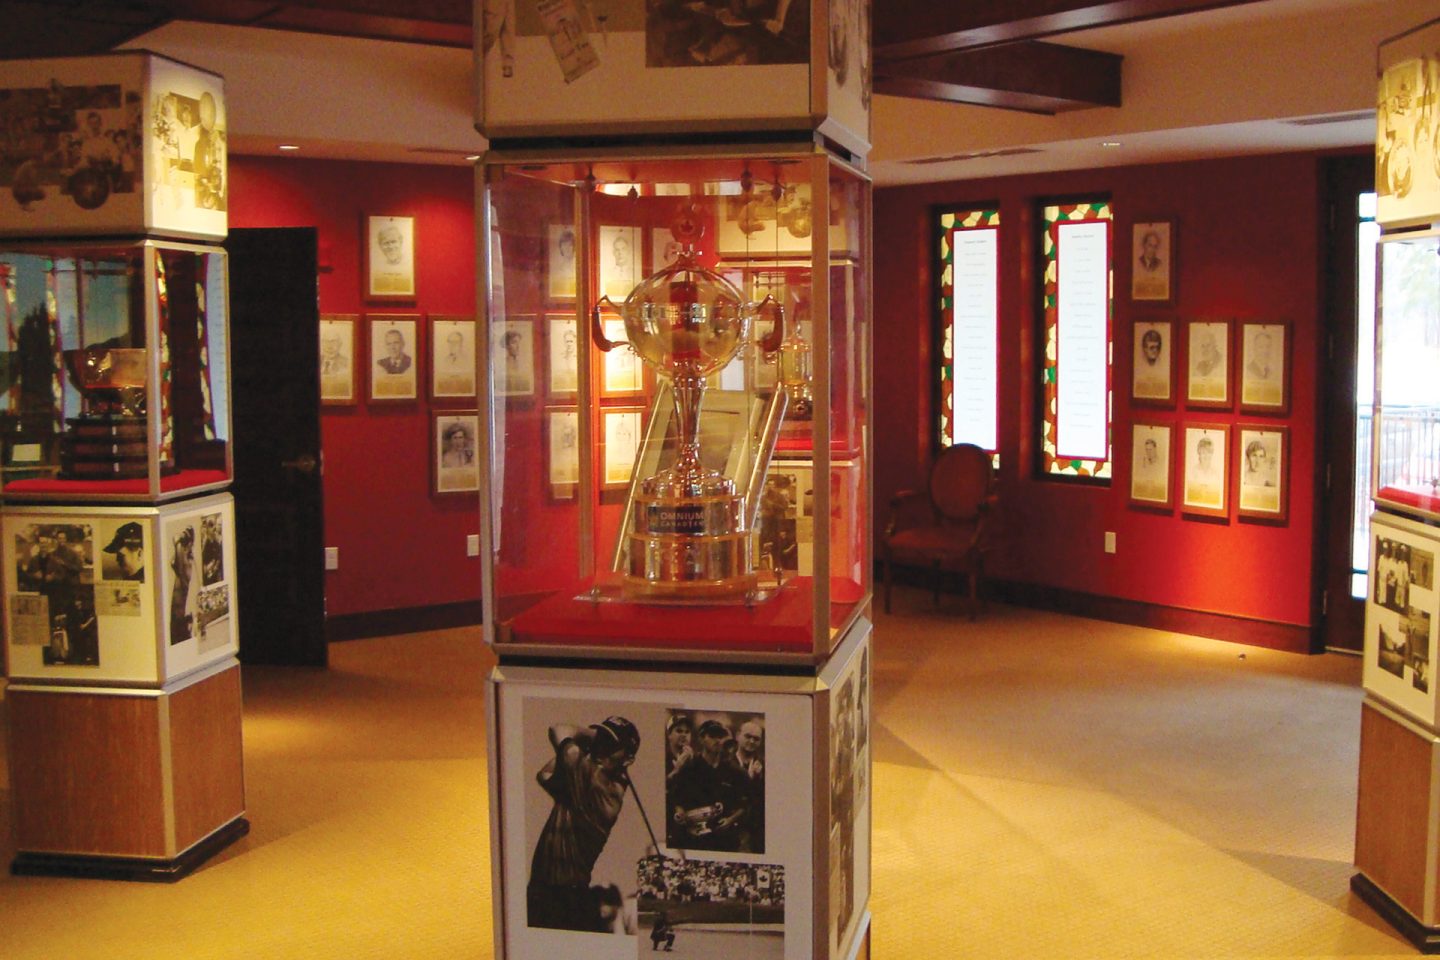 Canadian Golf Hall of Fame & Museum